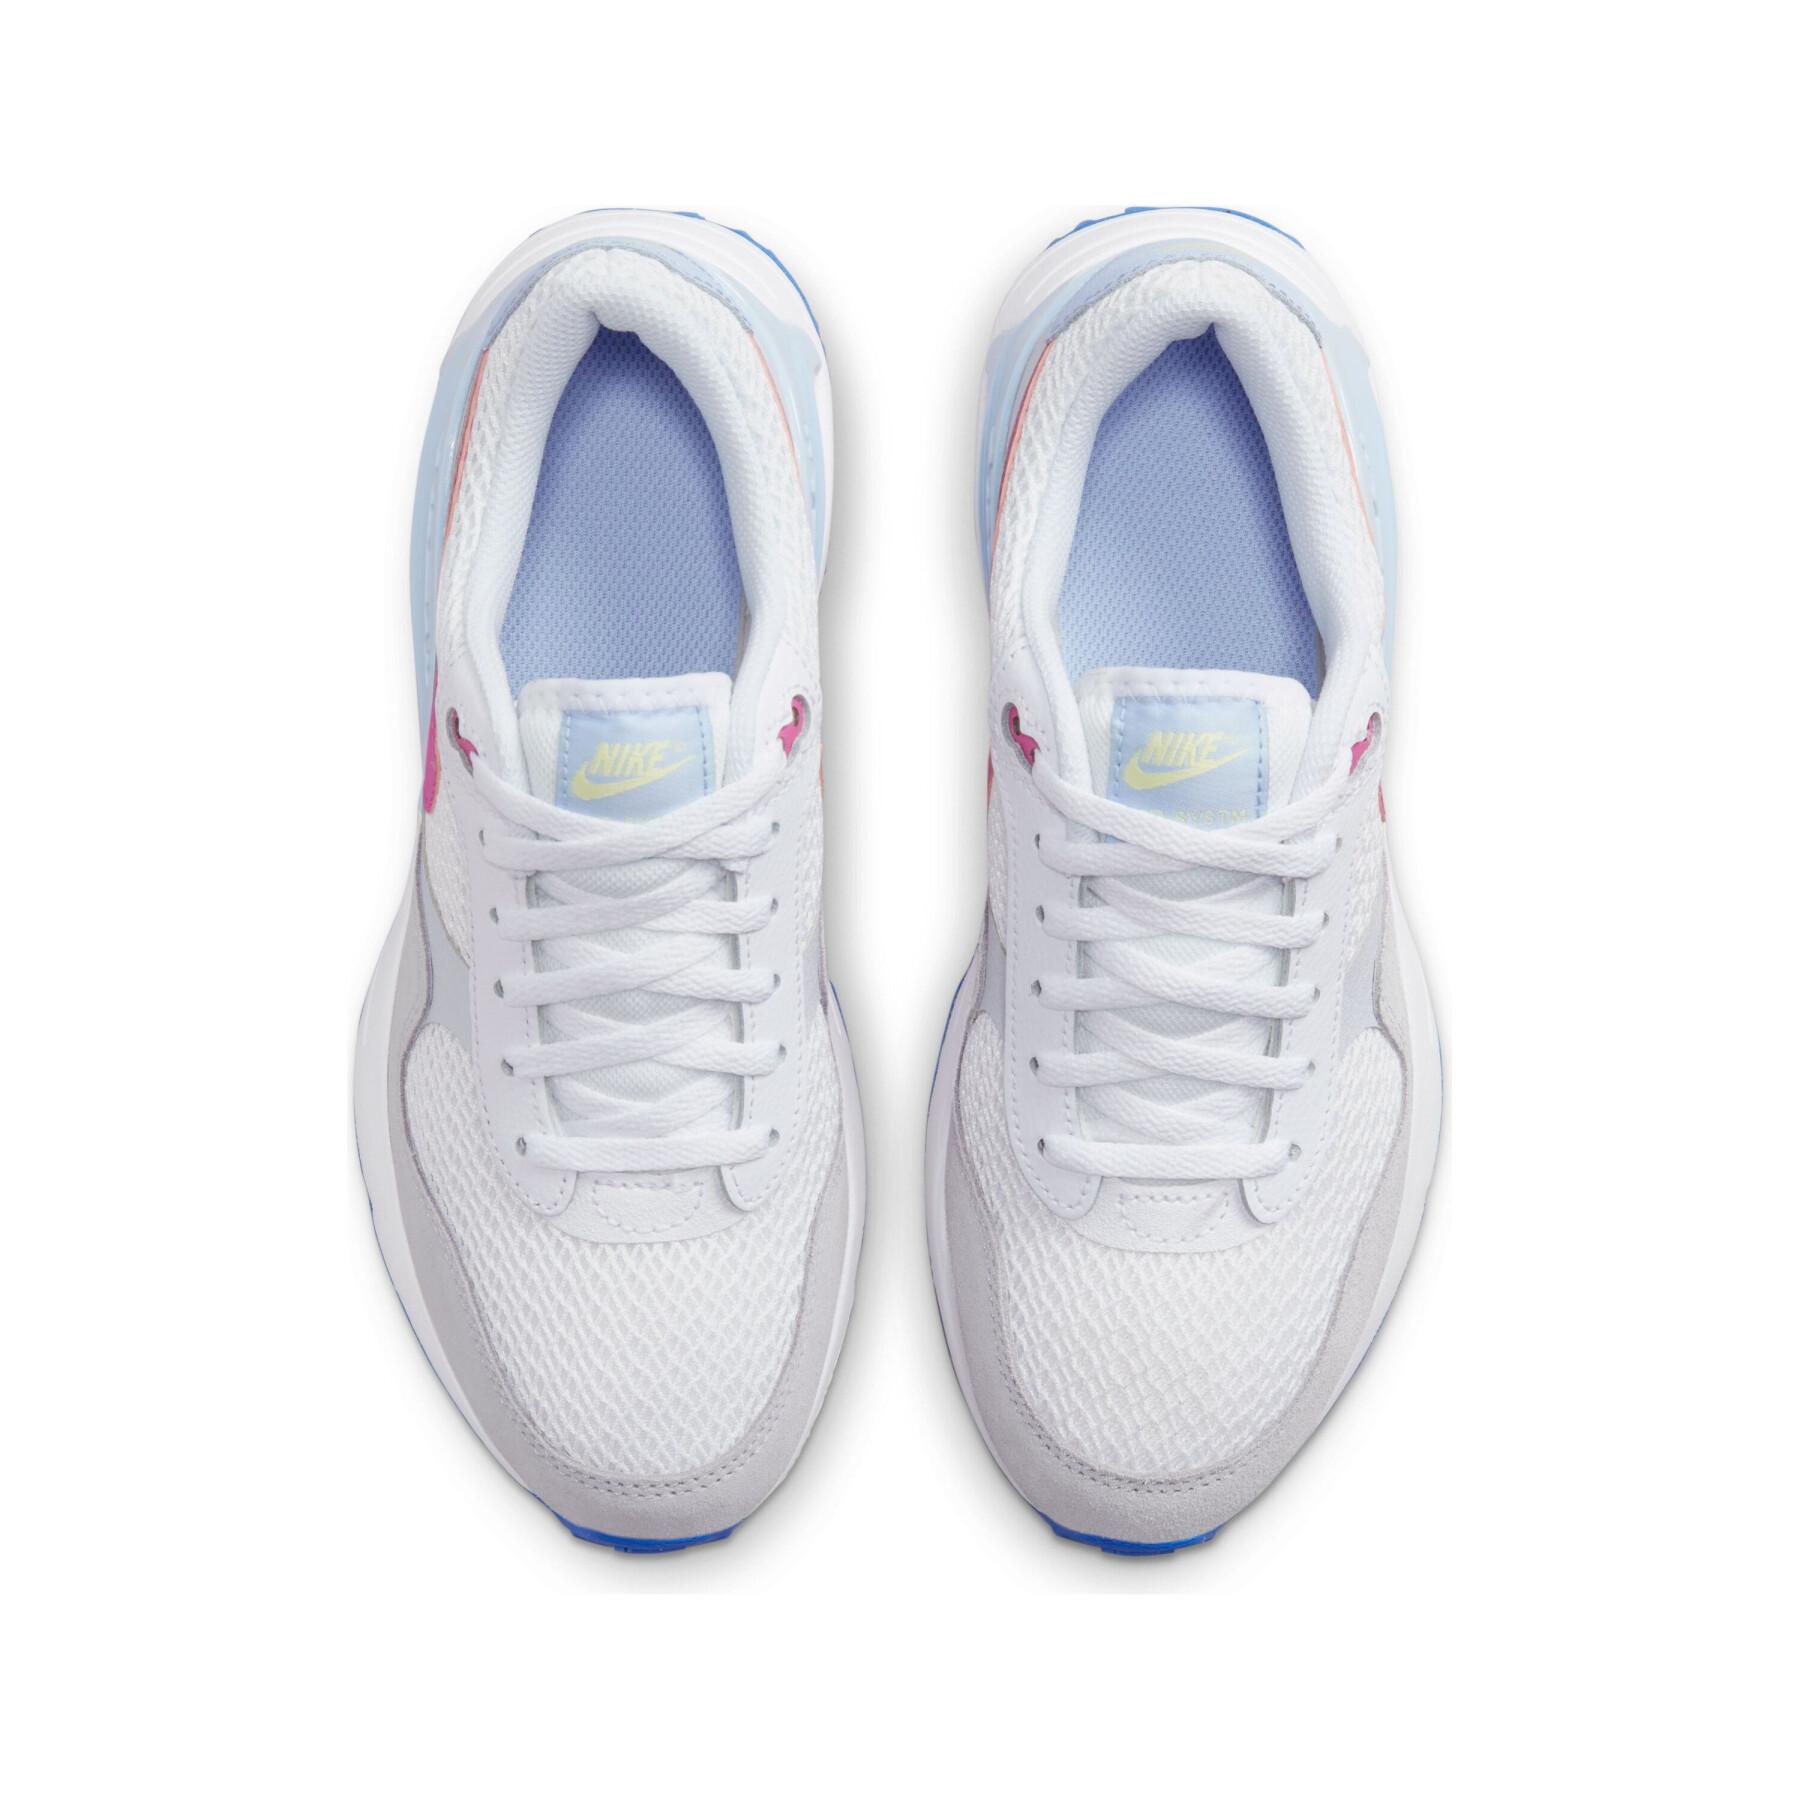 Kindertrainers Nike Air Max SYSTM